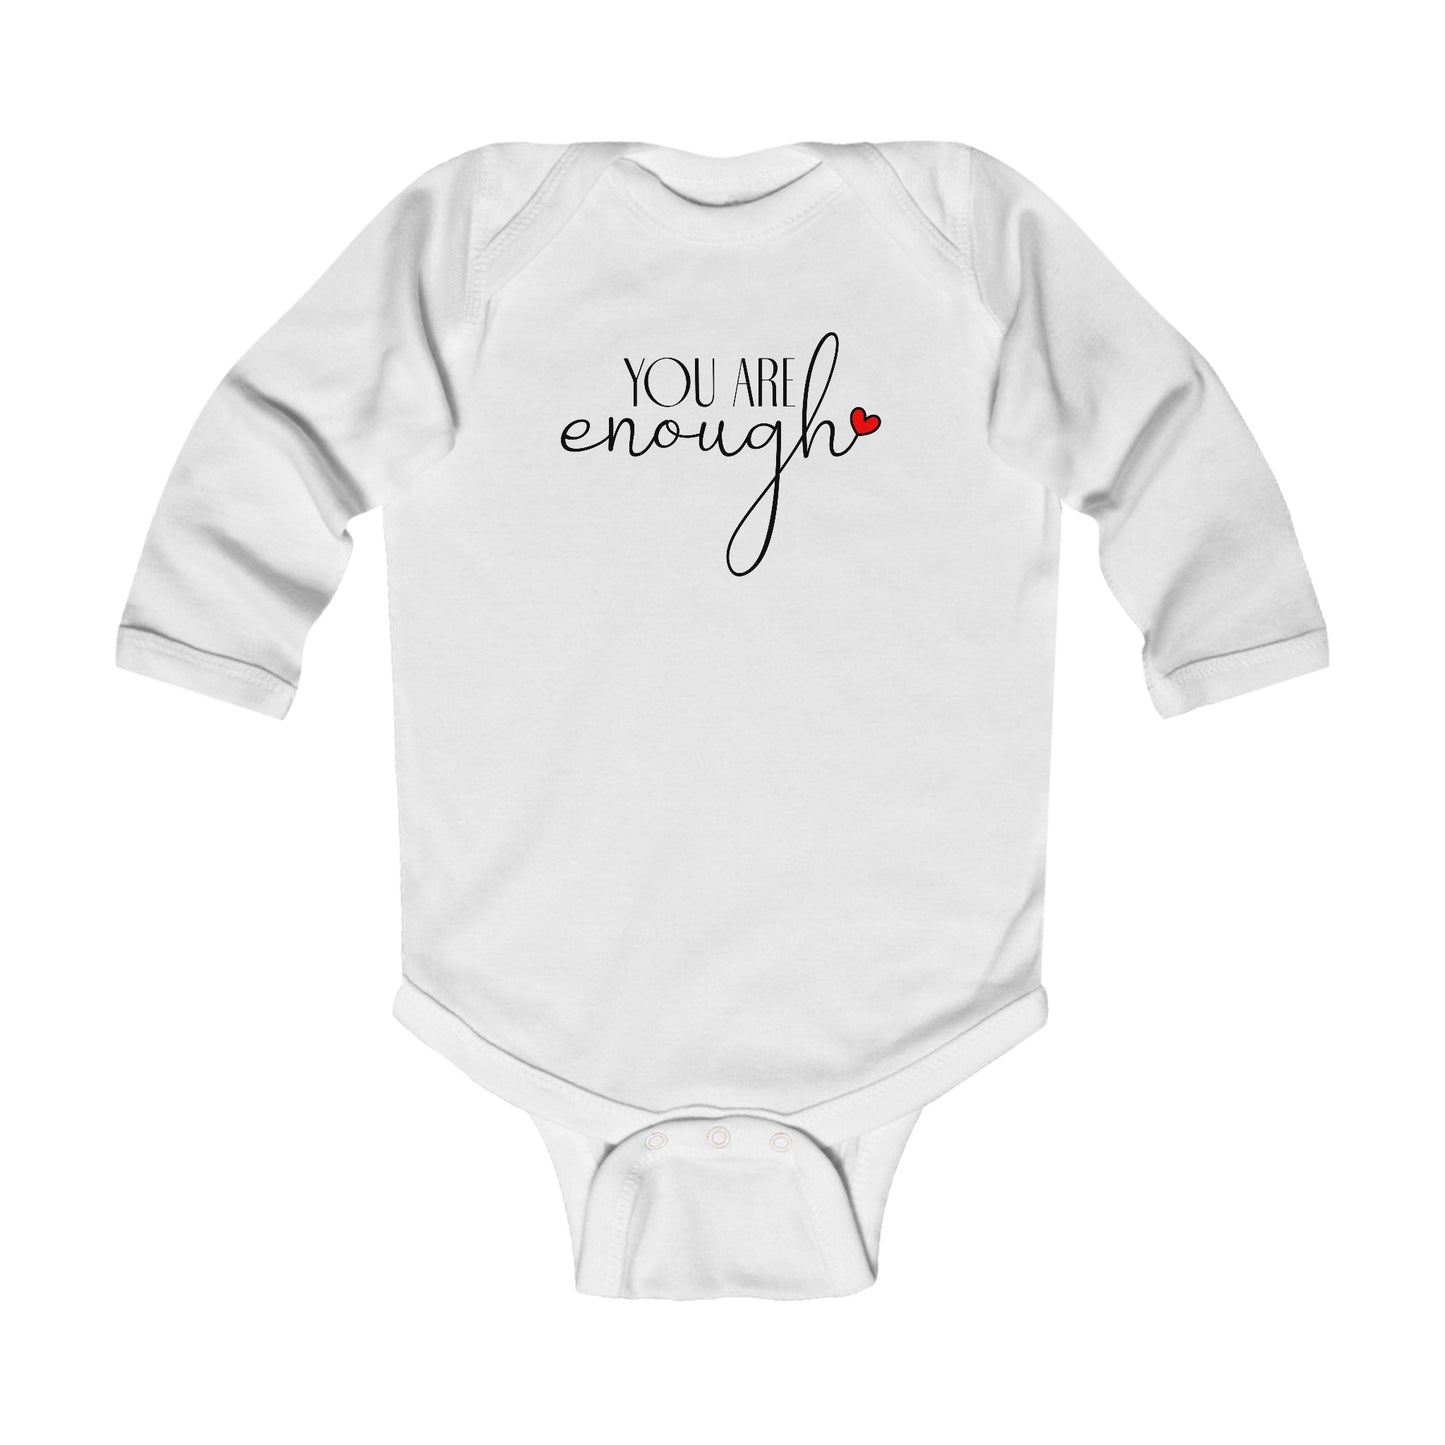 You Are Enough - Red Heart - Infant Long Sleeve Bodysuit